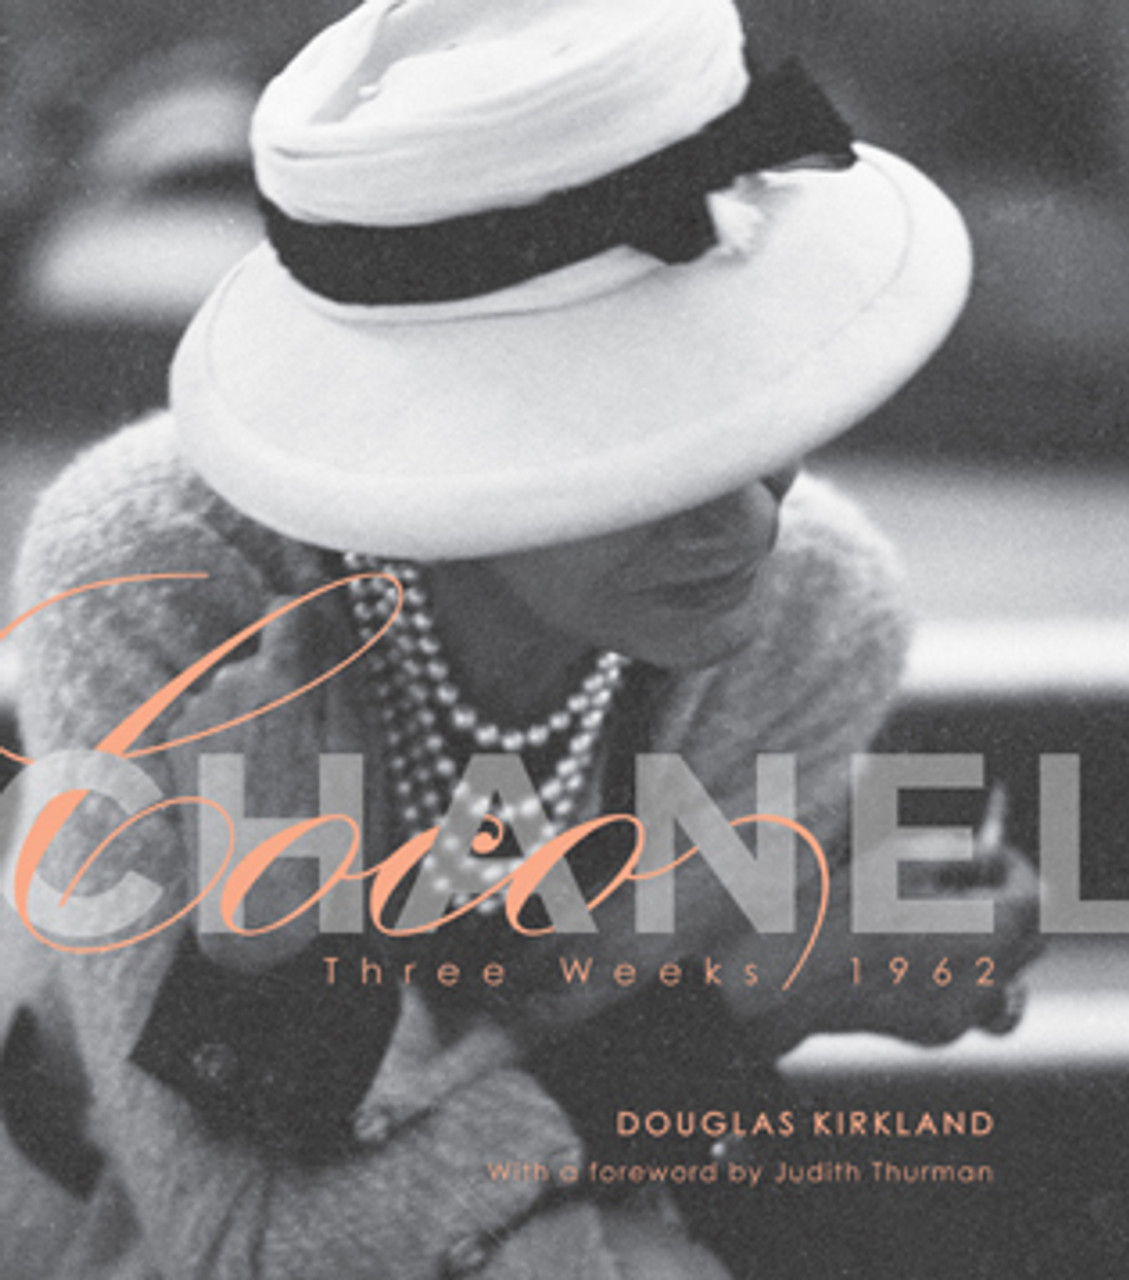 coco chanel the legend and the life by justine picardie